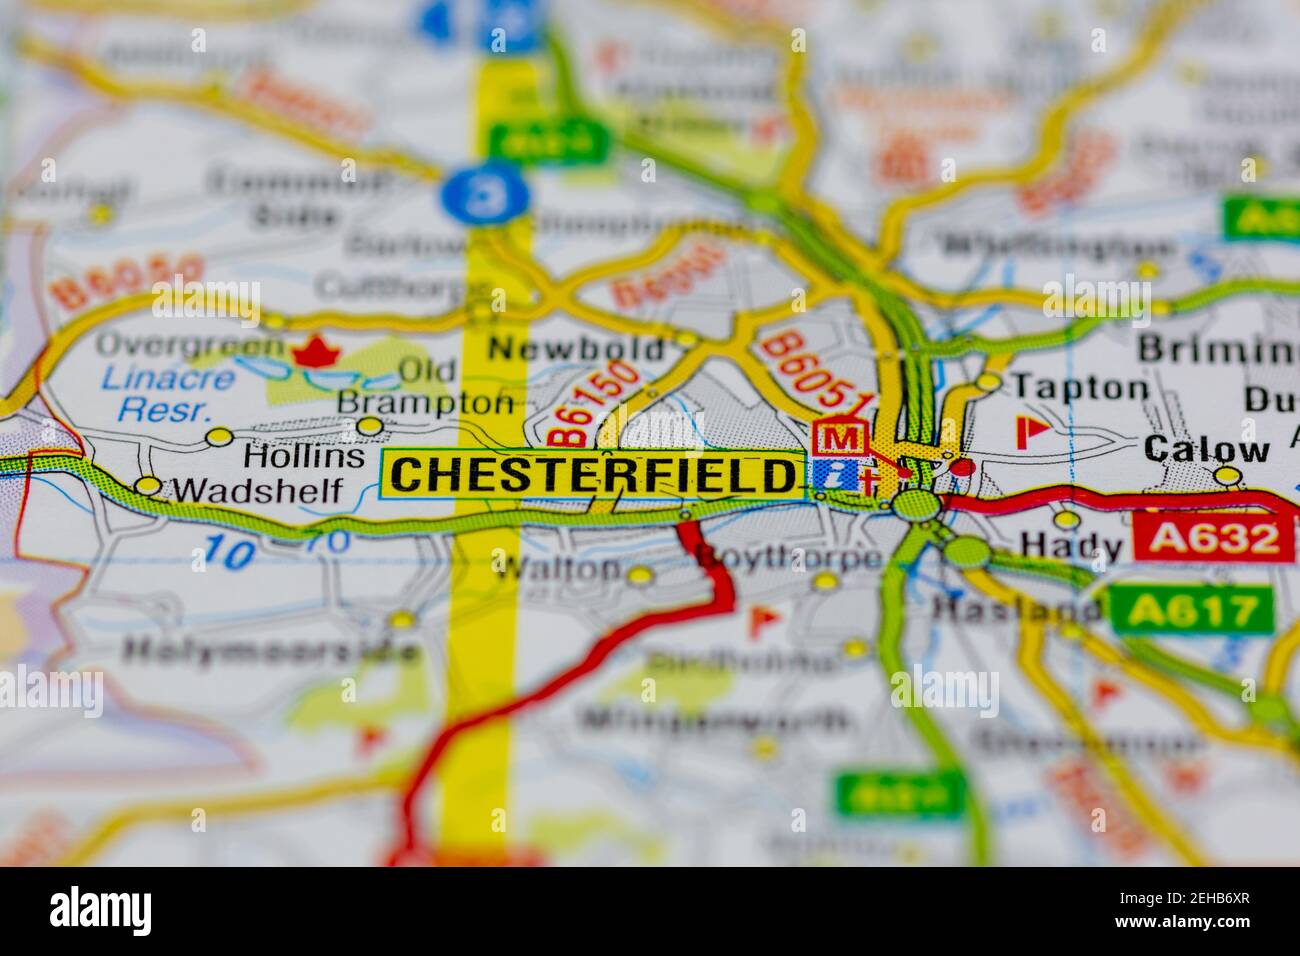 02-19-2021 Portsmouth, Hampshire, UK chesterfield and surrounding areas shown on a road map or Geography map Stock Photo